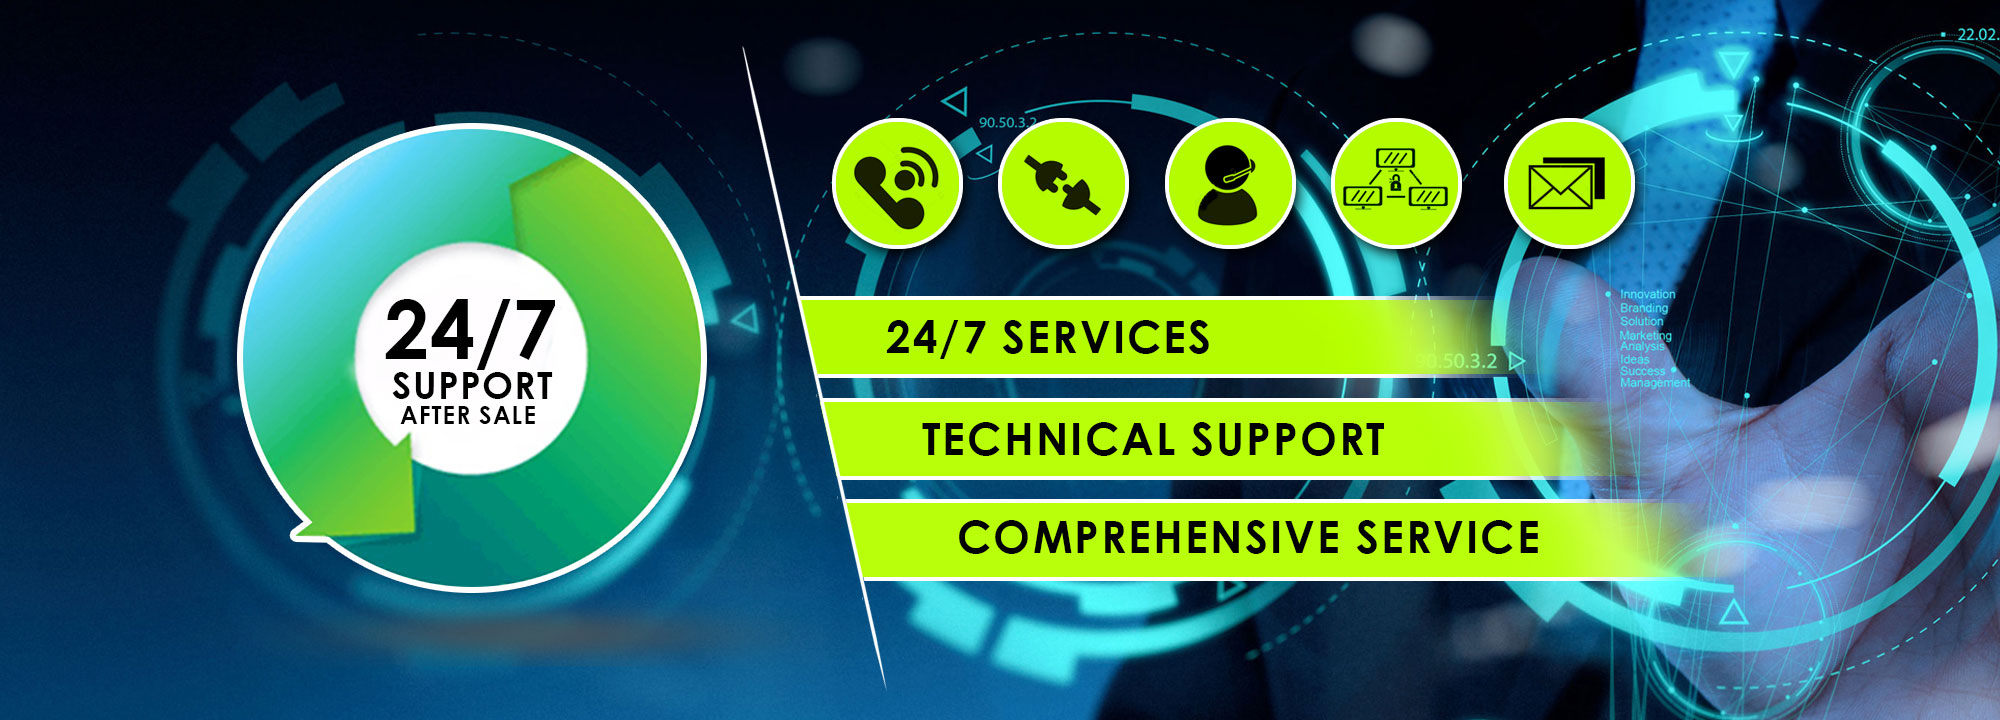 24/7 Technical and Network Support